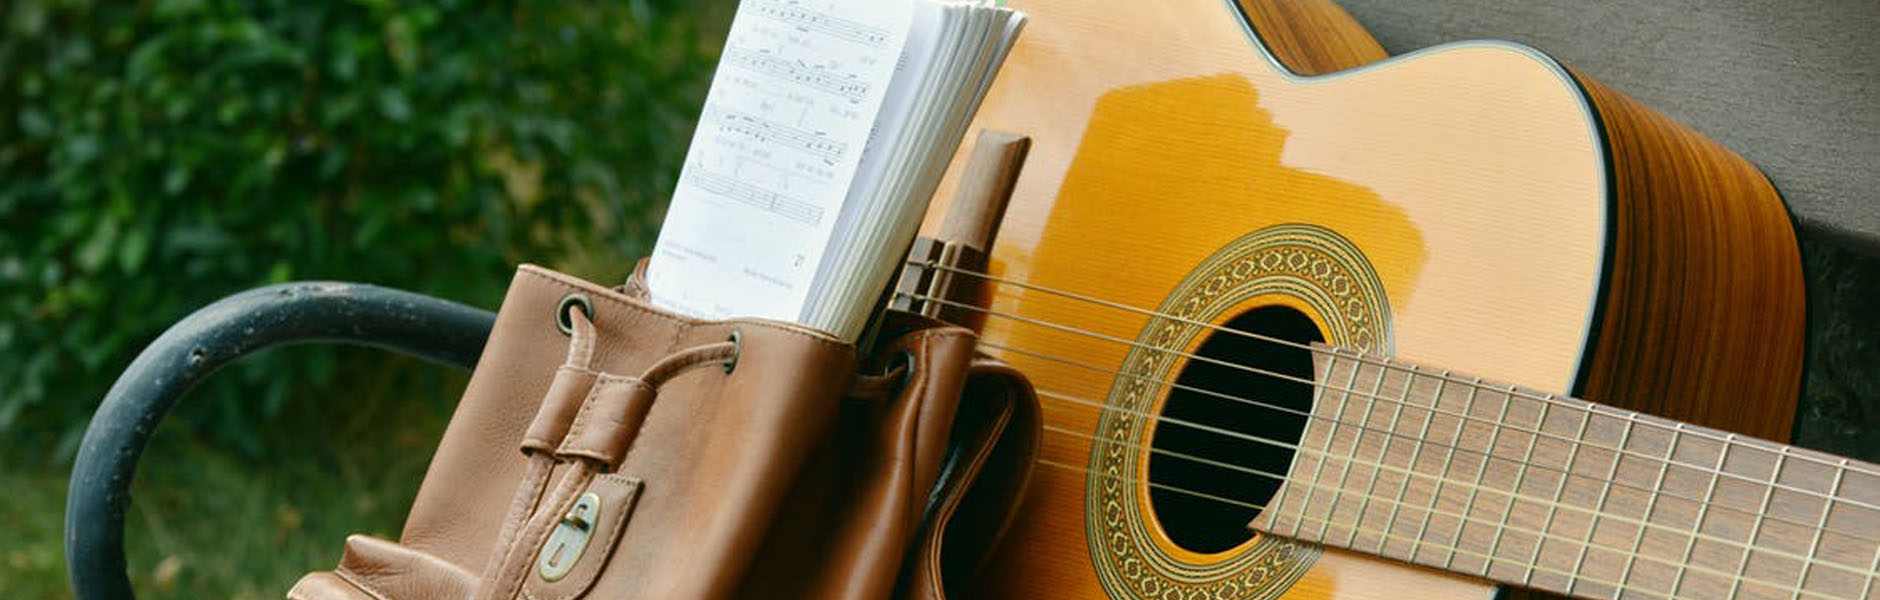 books and guitar